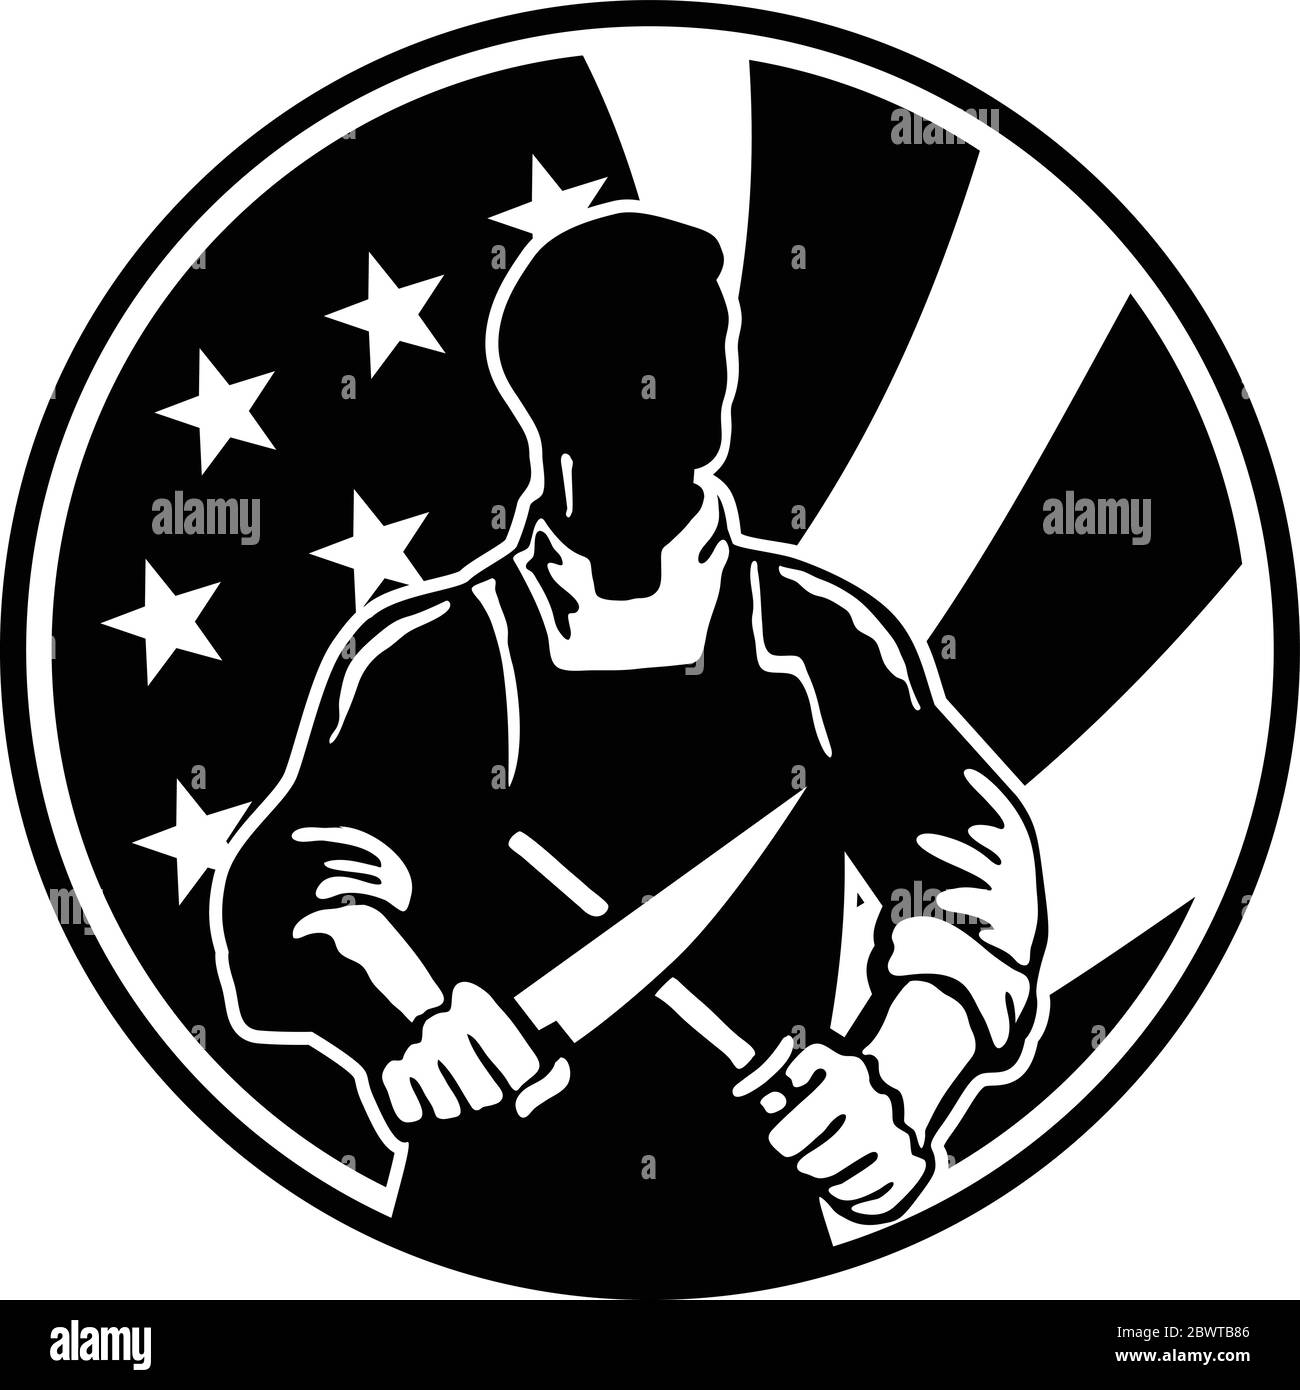 Icon retro style illustration of an American butcher sharpening knife viewed from front  with United States of America USA star spangled banner or sta Stock Vector